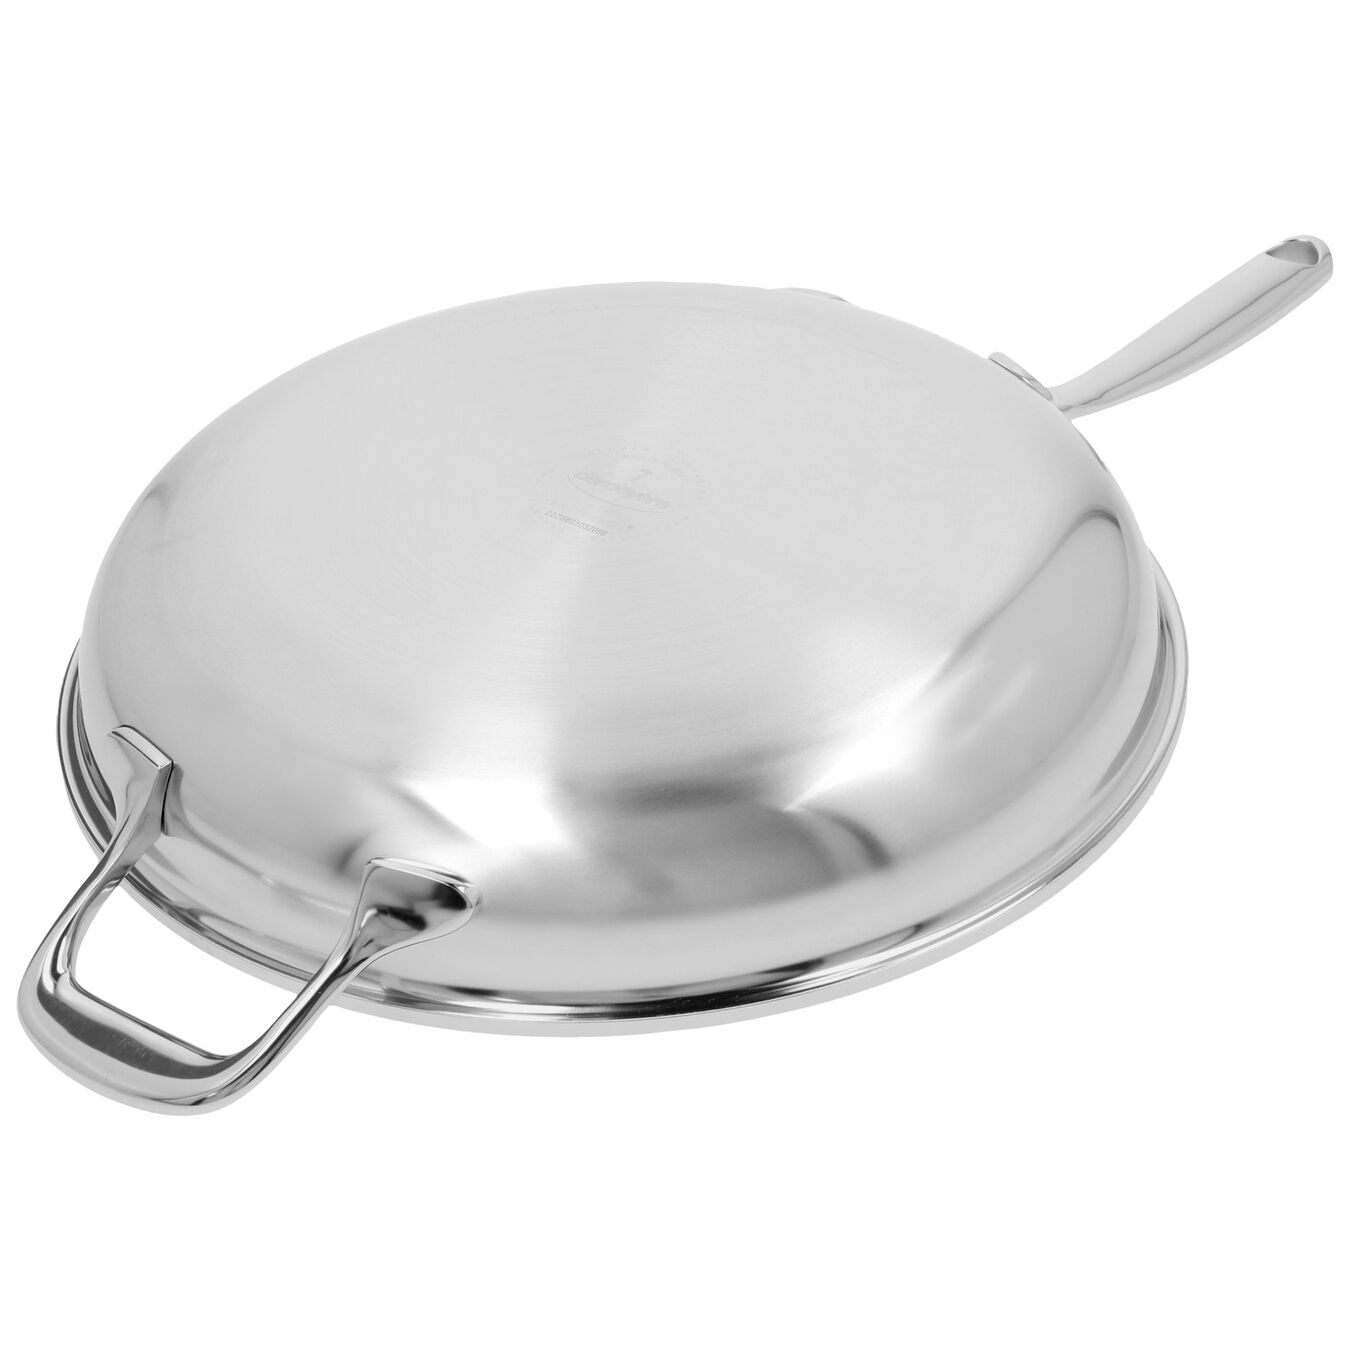 11-inch, 18/10 Stainless Steel, Proline Fry Pan with Helper Handle,,large 4